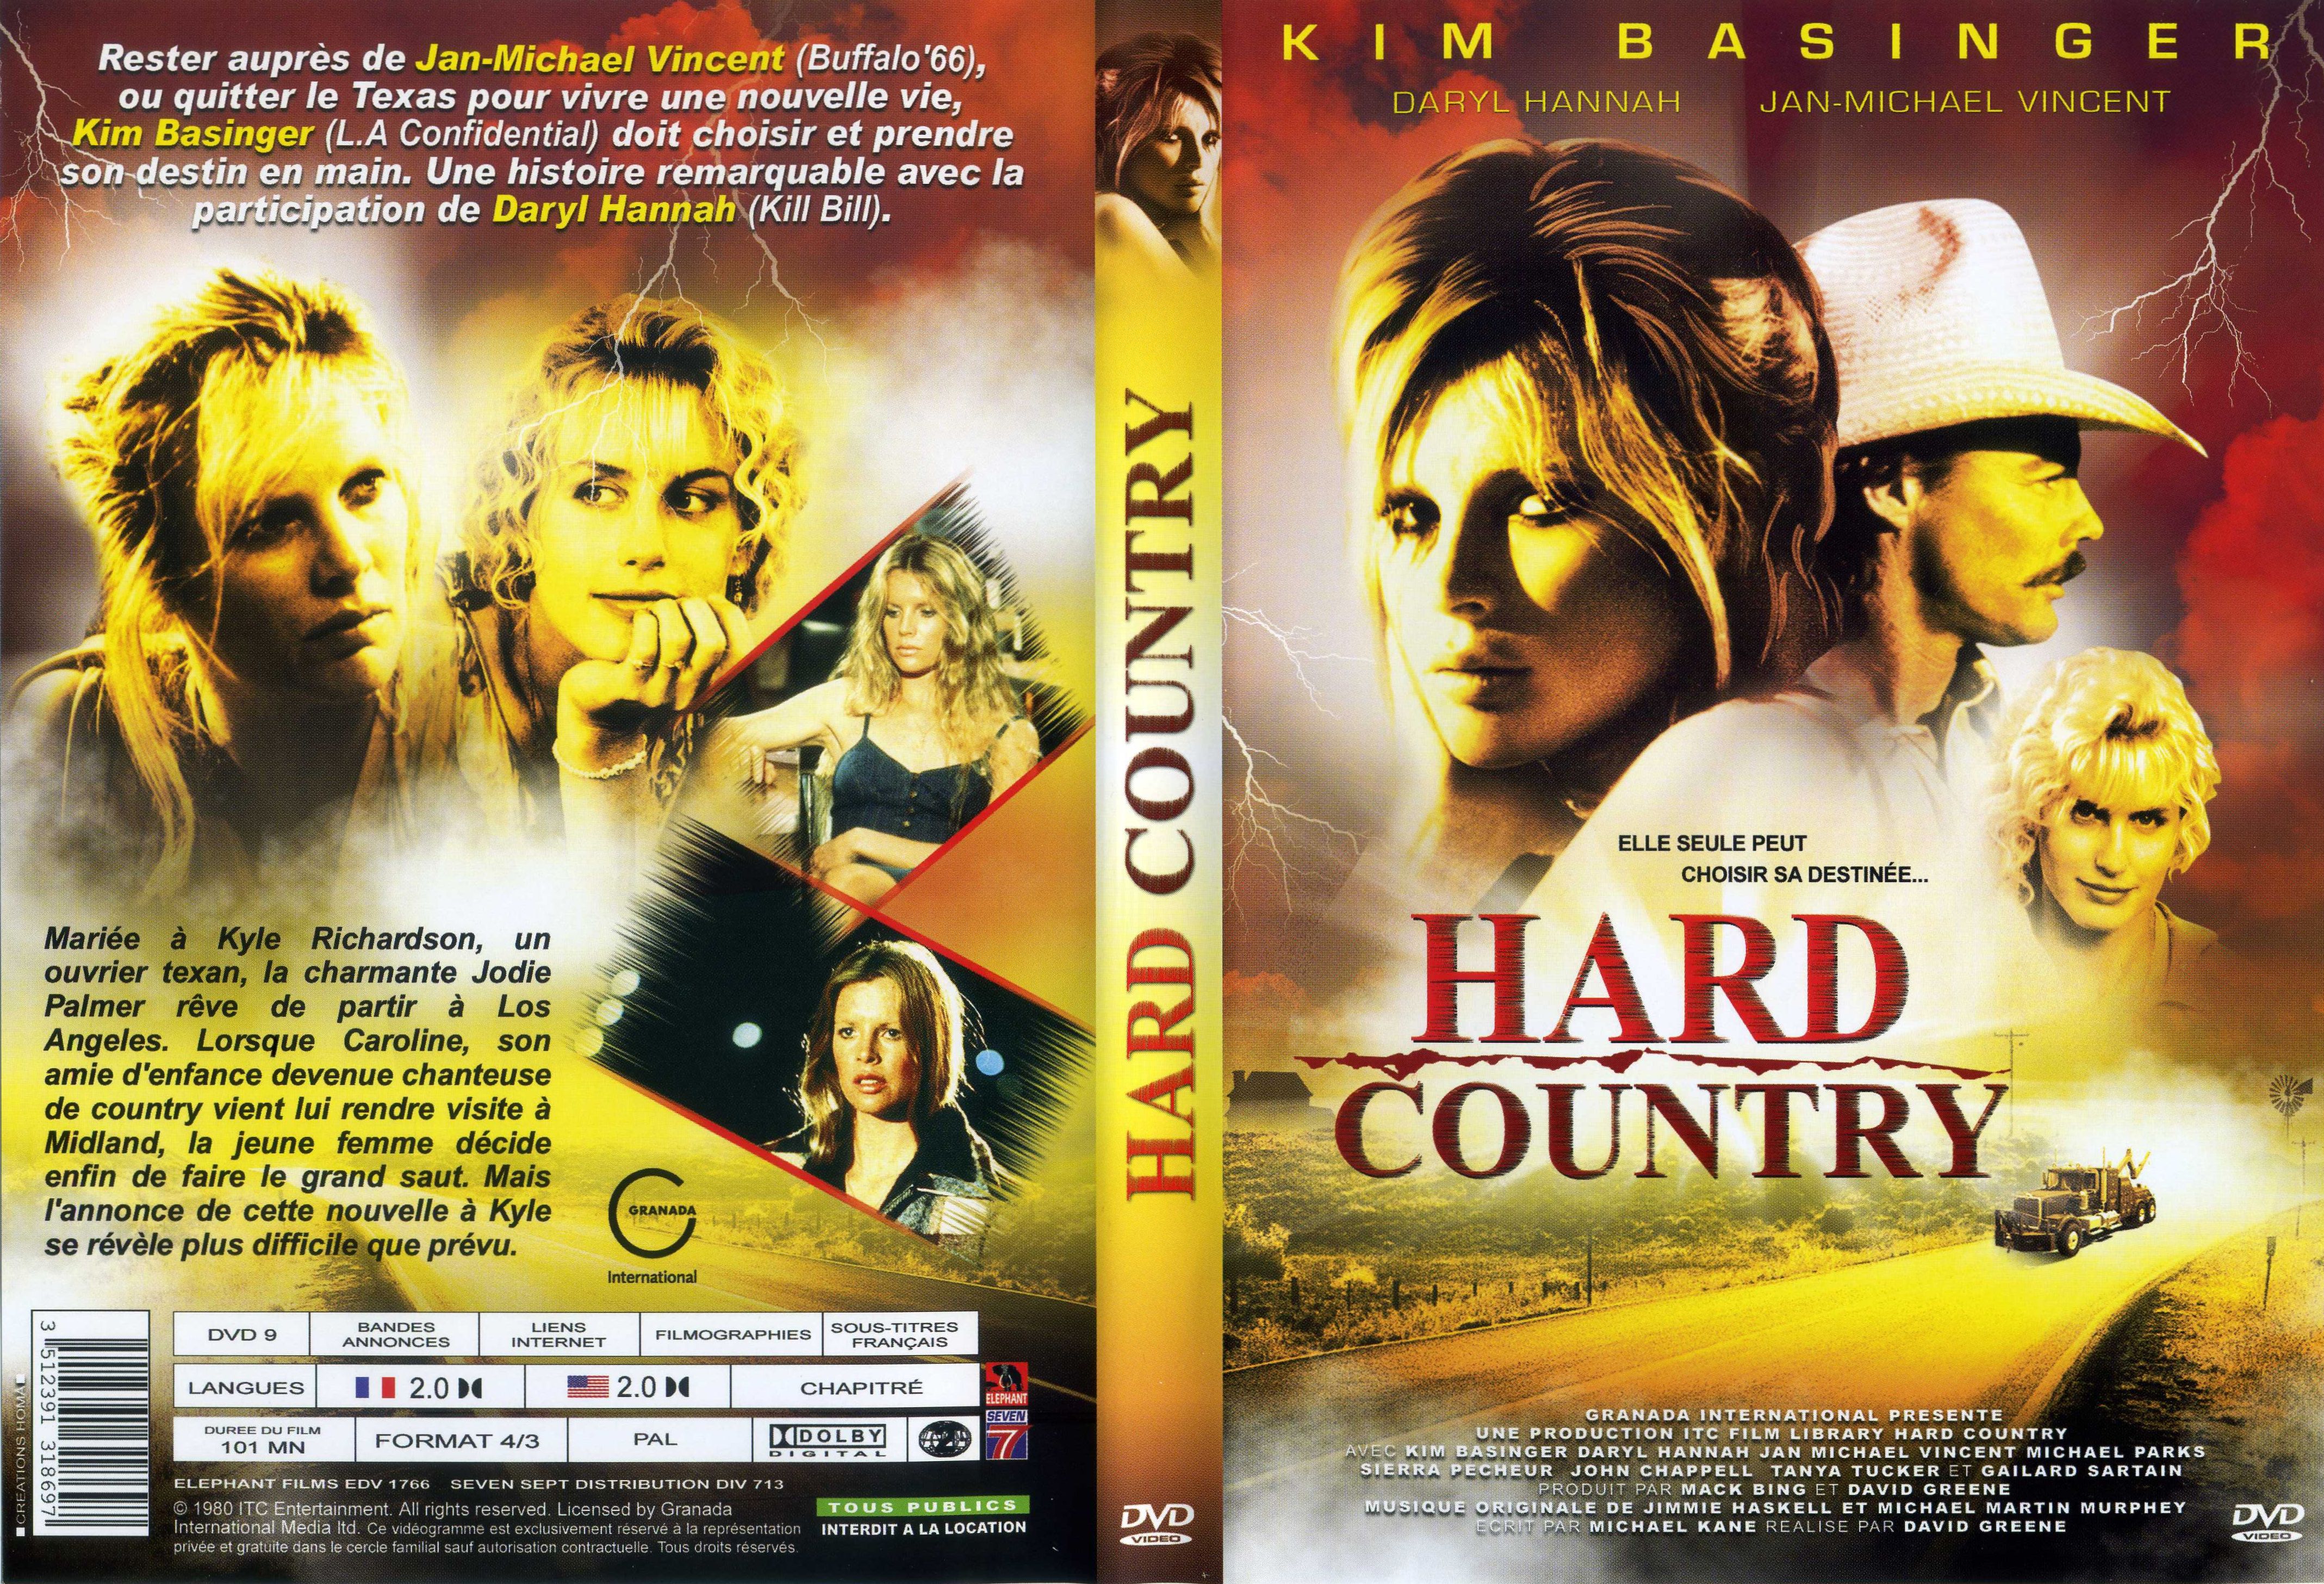 Jaquette DVD Hard country